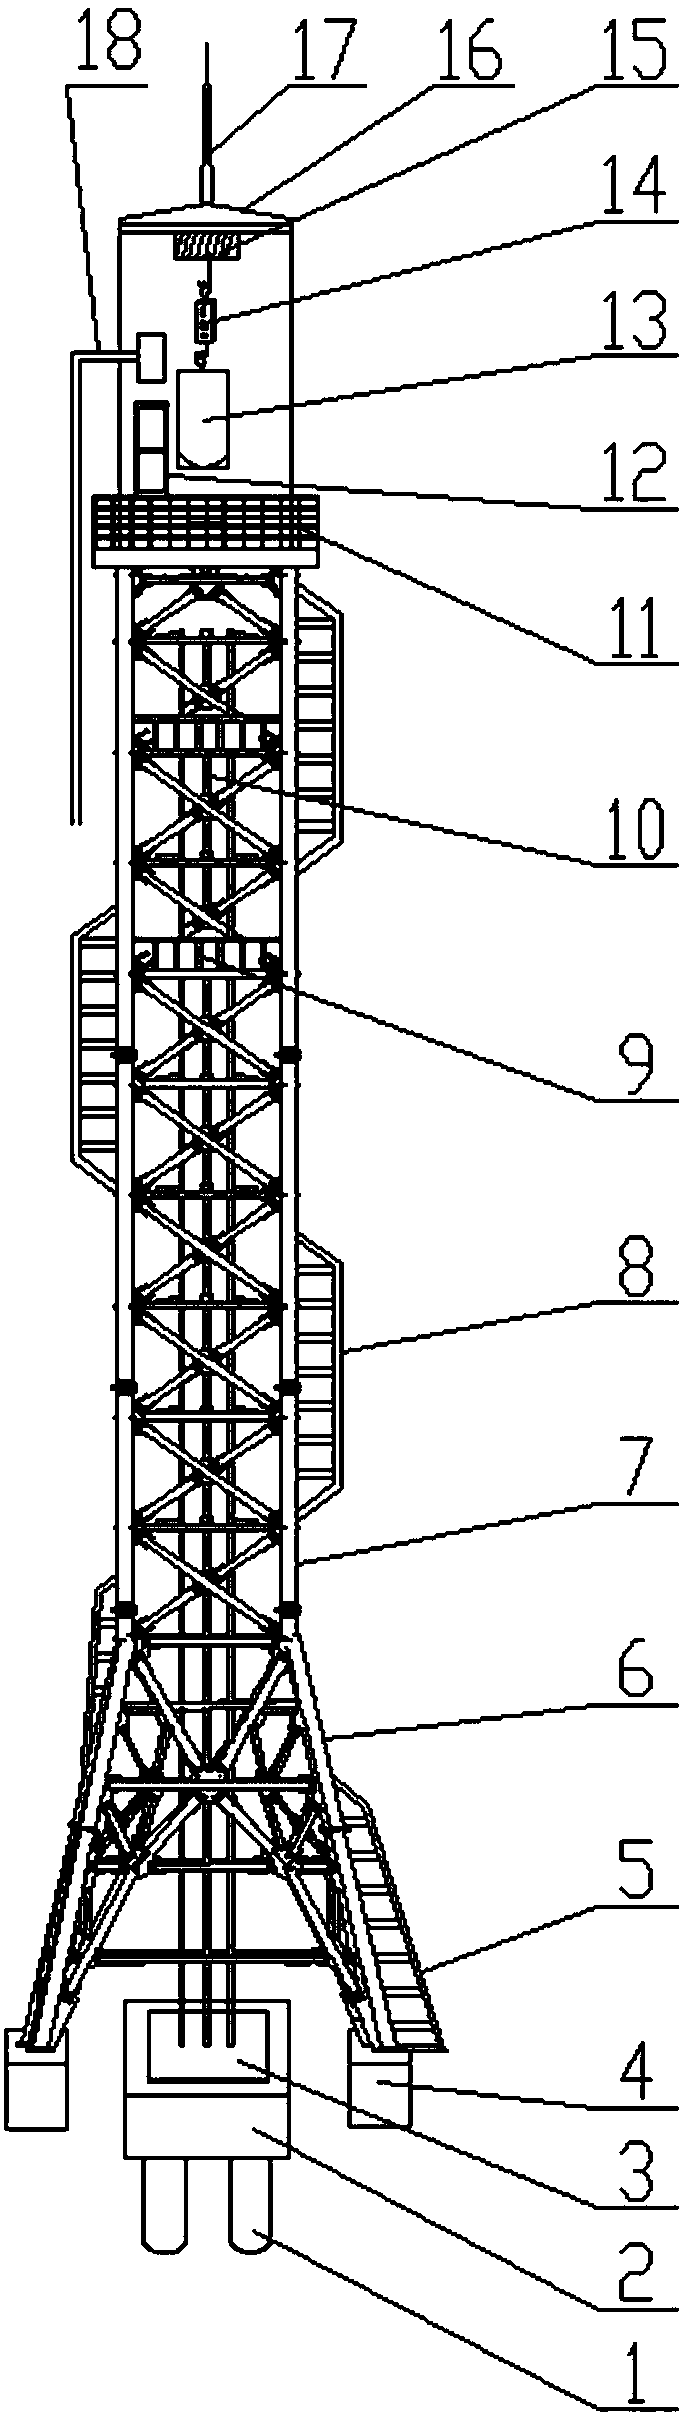 High-altitude falling test system for spent fuel storage and transportation container of nuclear power plant